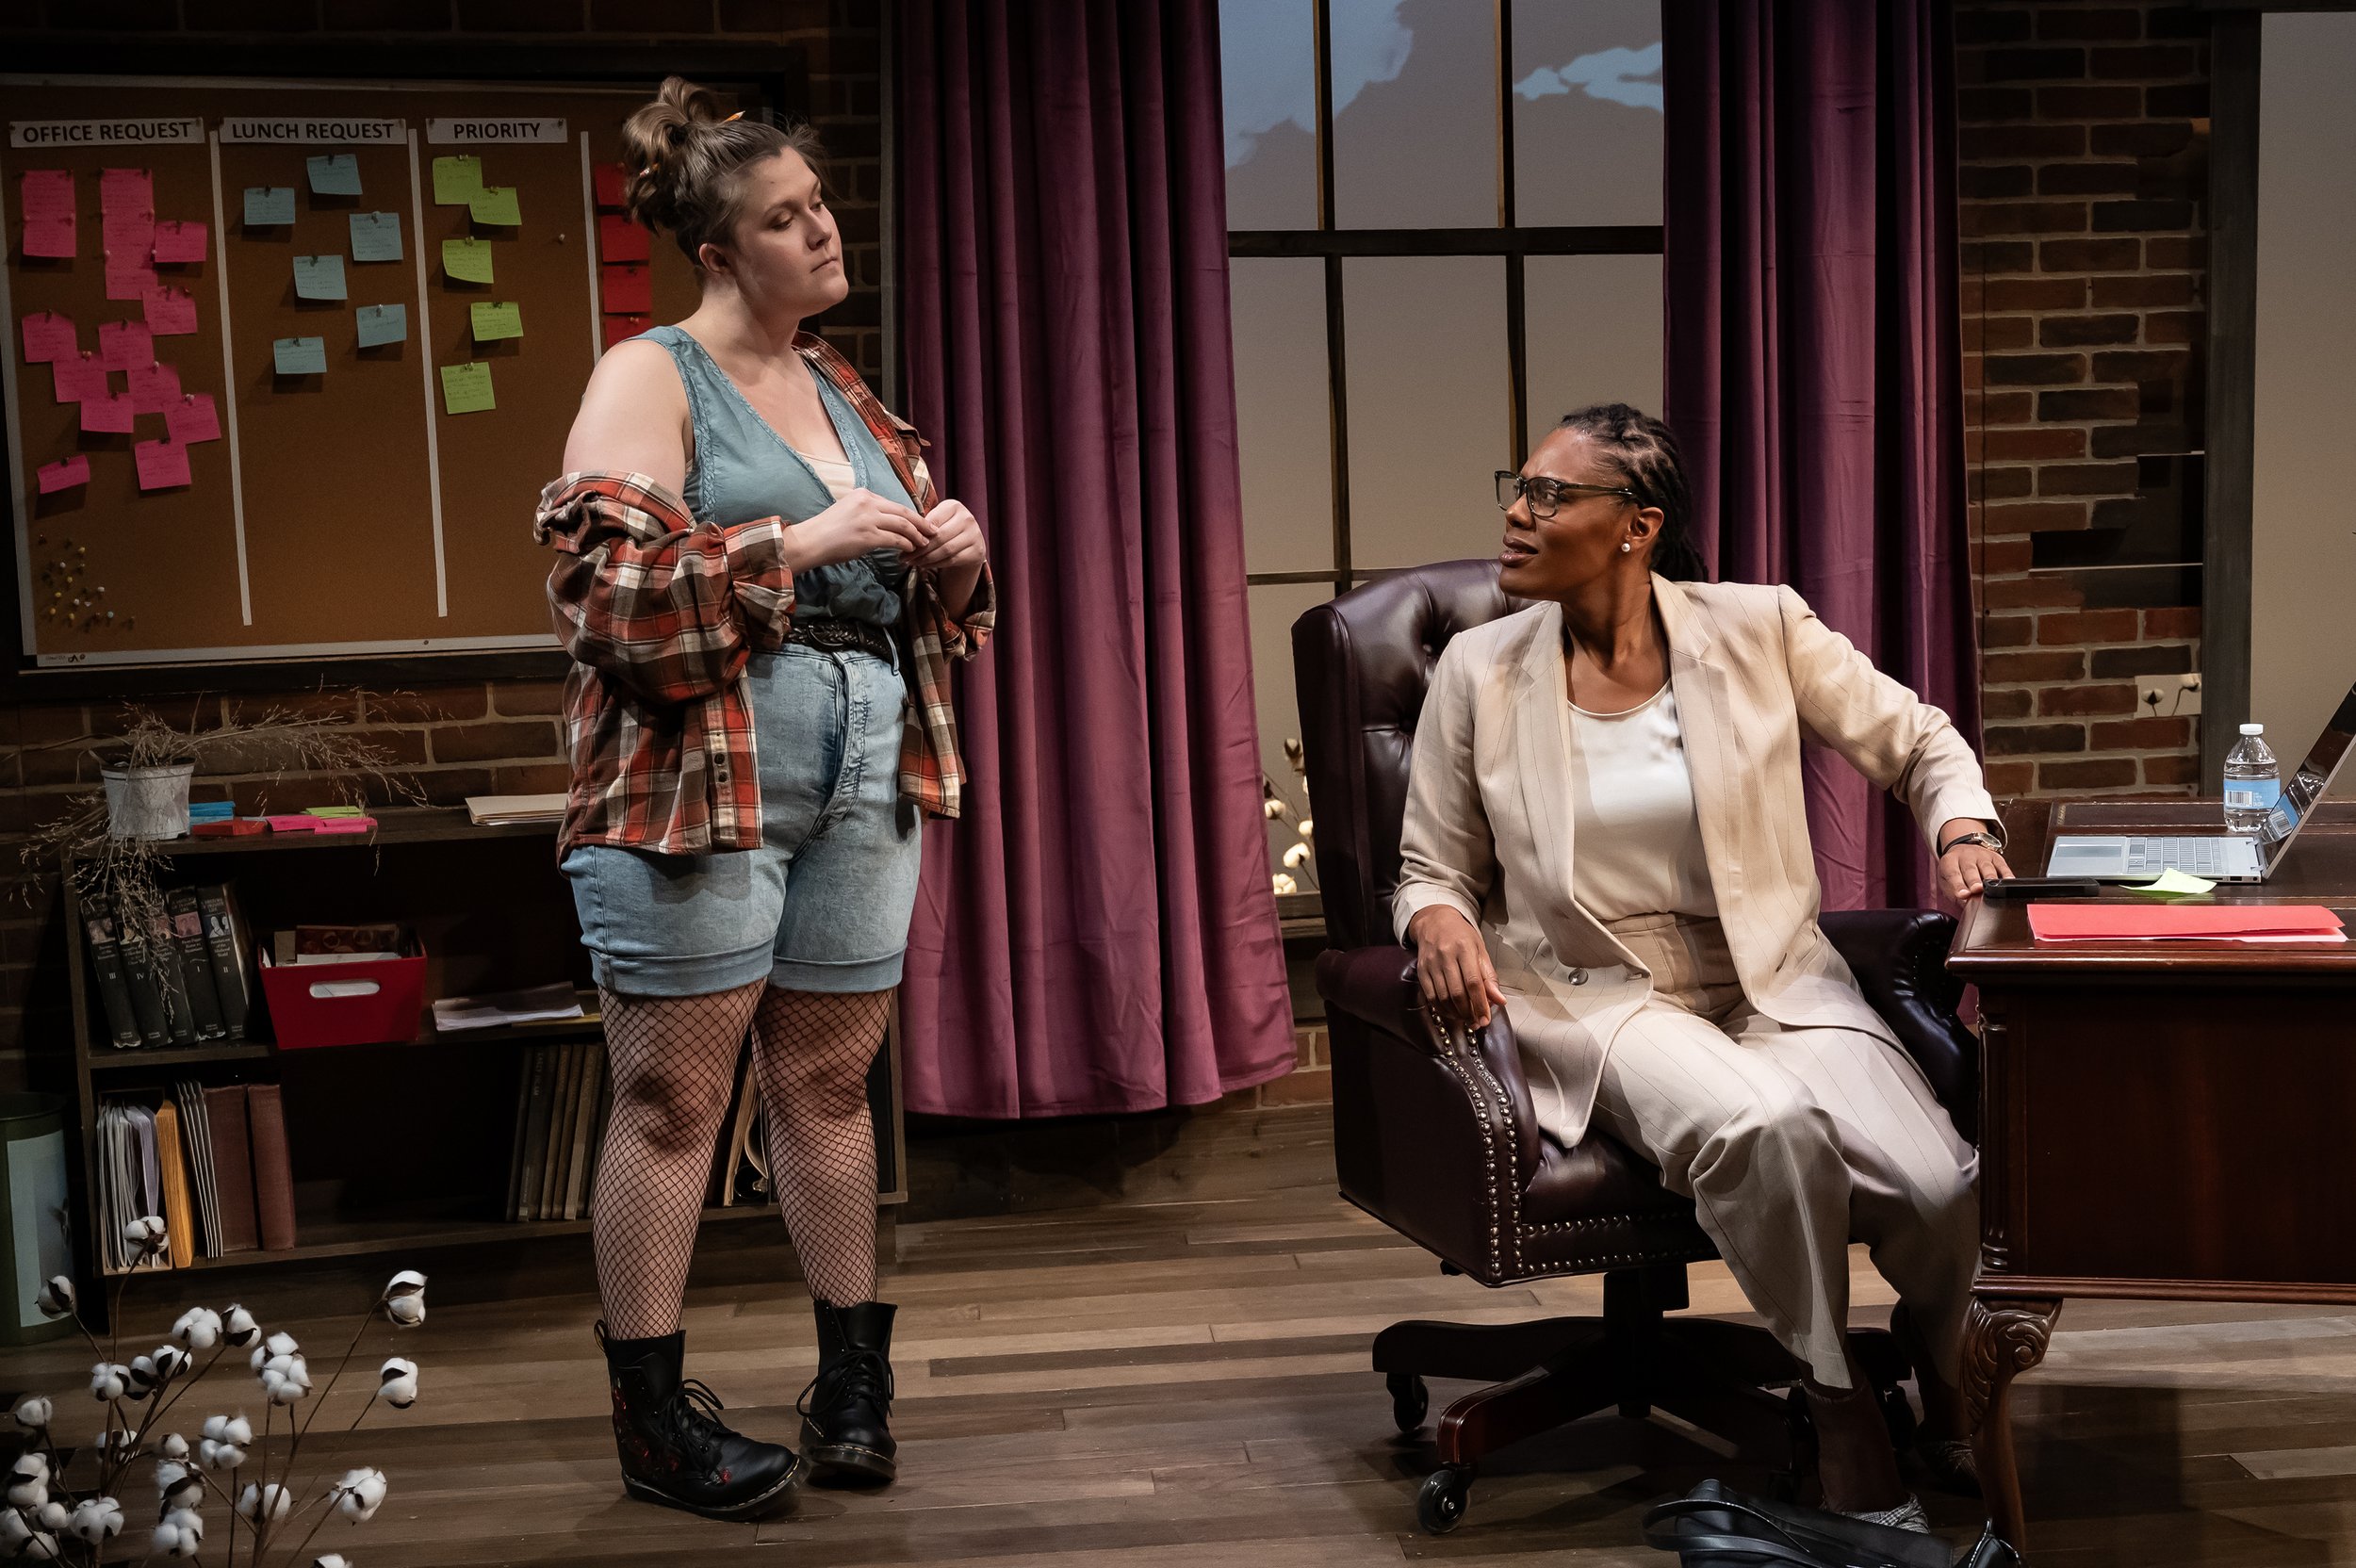   Caro Dubberly as Candice and Nikkole Salter as Sandra in Mosaic Theater’s production of  Confederates  by Dominique Morisseau. Photo by Chris Banks . 